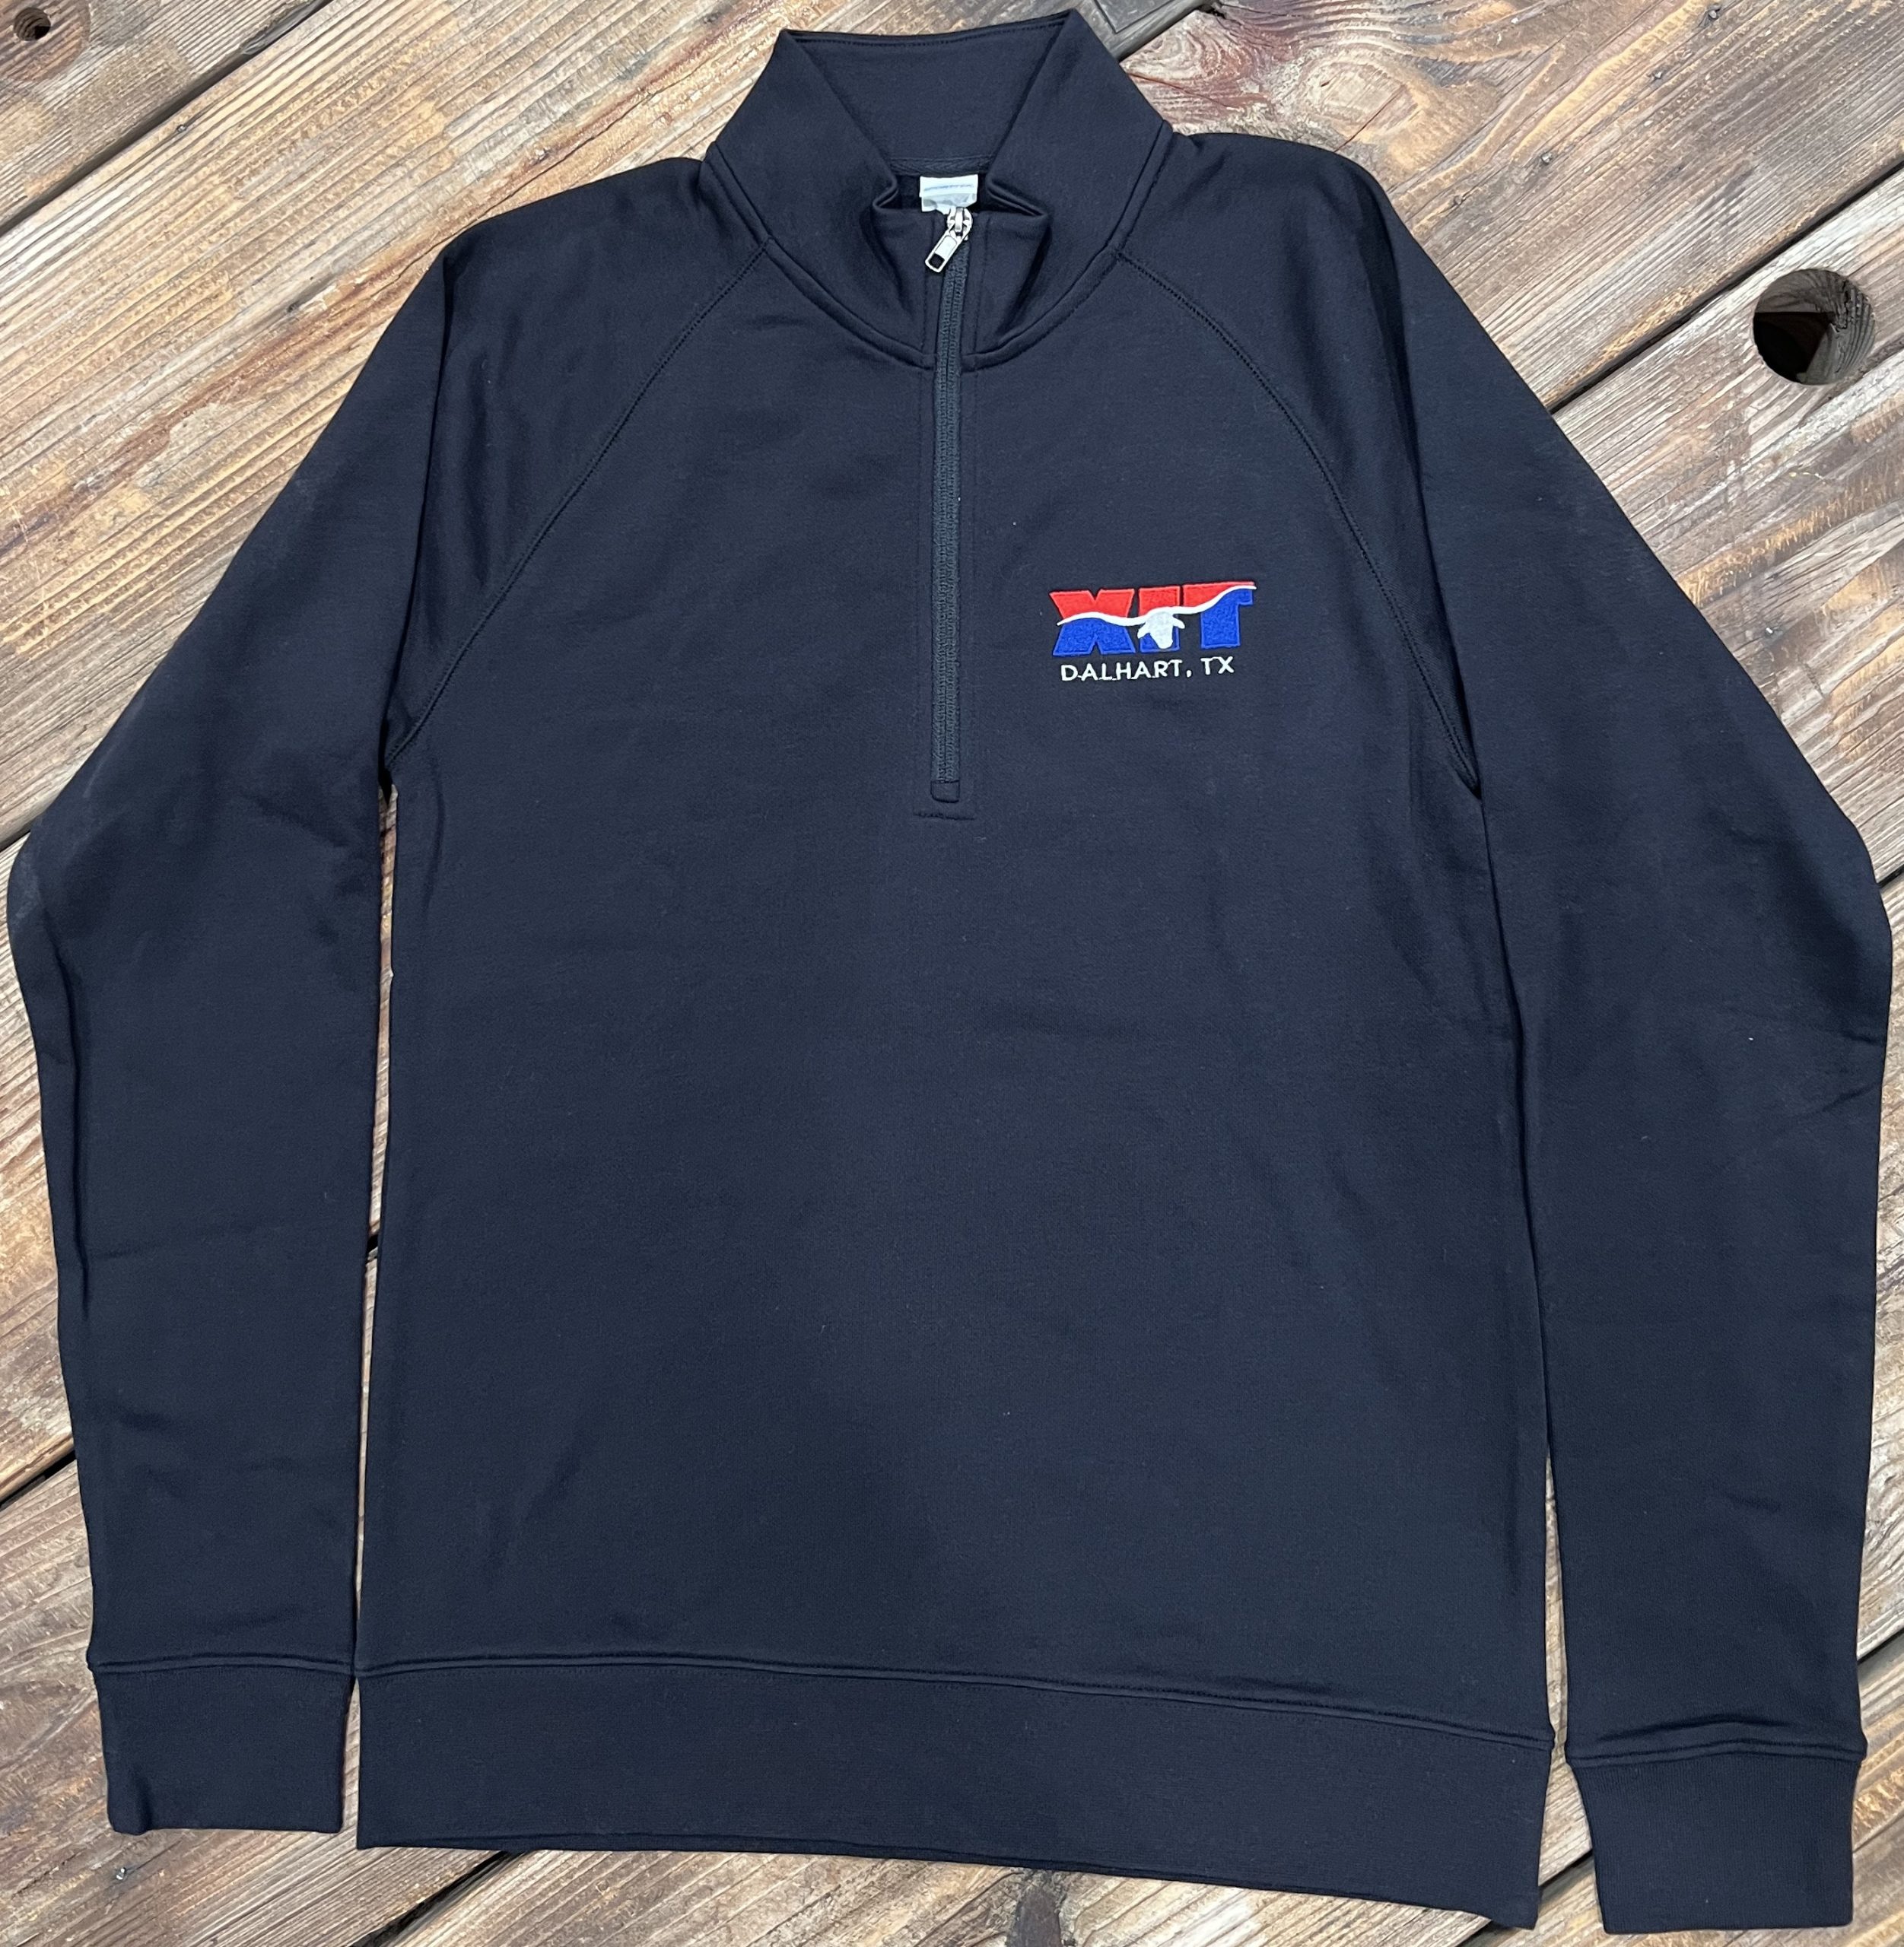 1/4 ZIP CLASSIC XIT LOGO PULLOVER - XIT Rodeo and Reunion